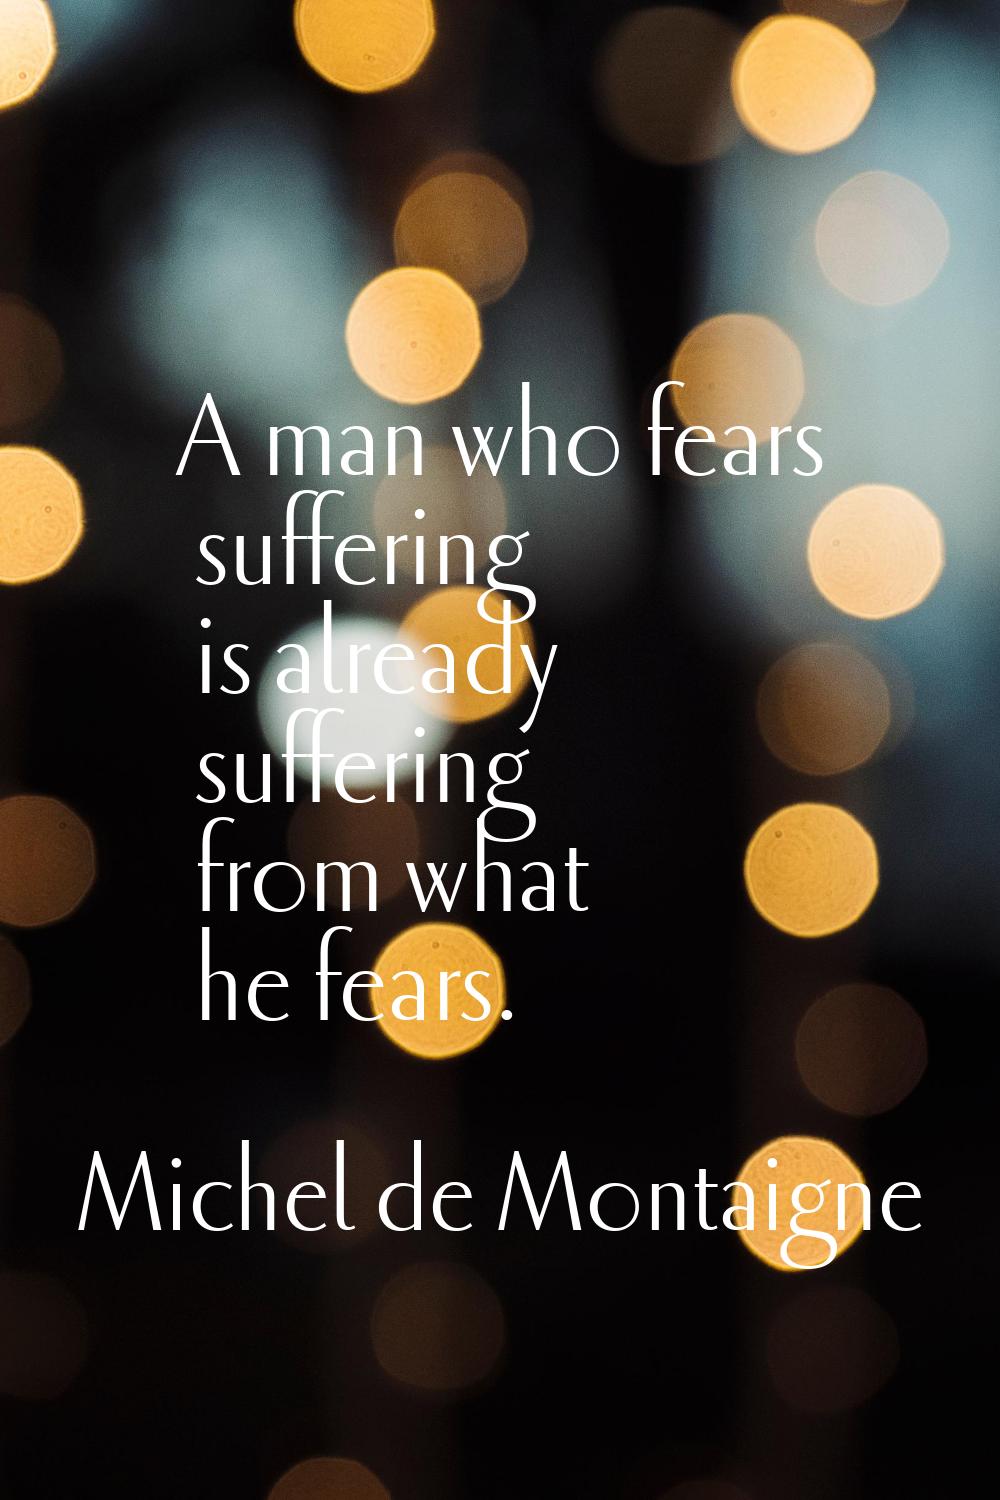 A man who fears suffering is already suffering from what he fears.